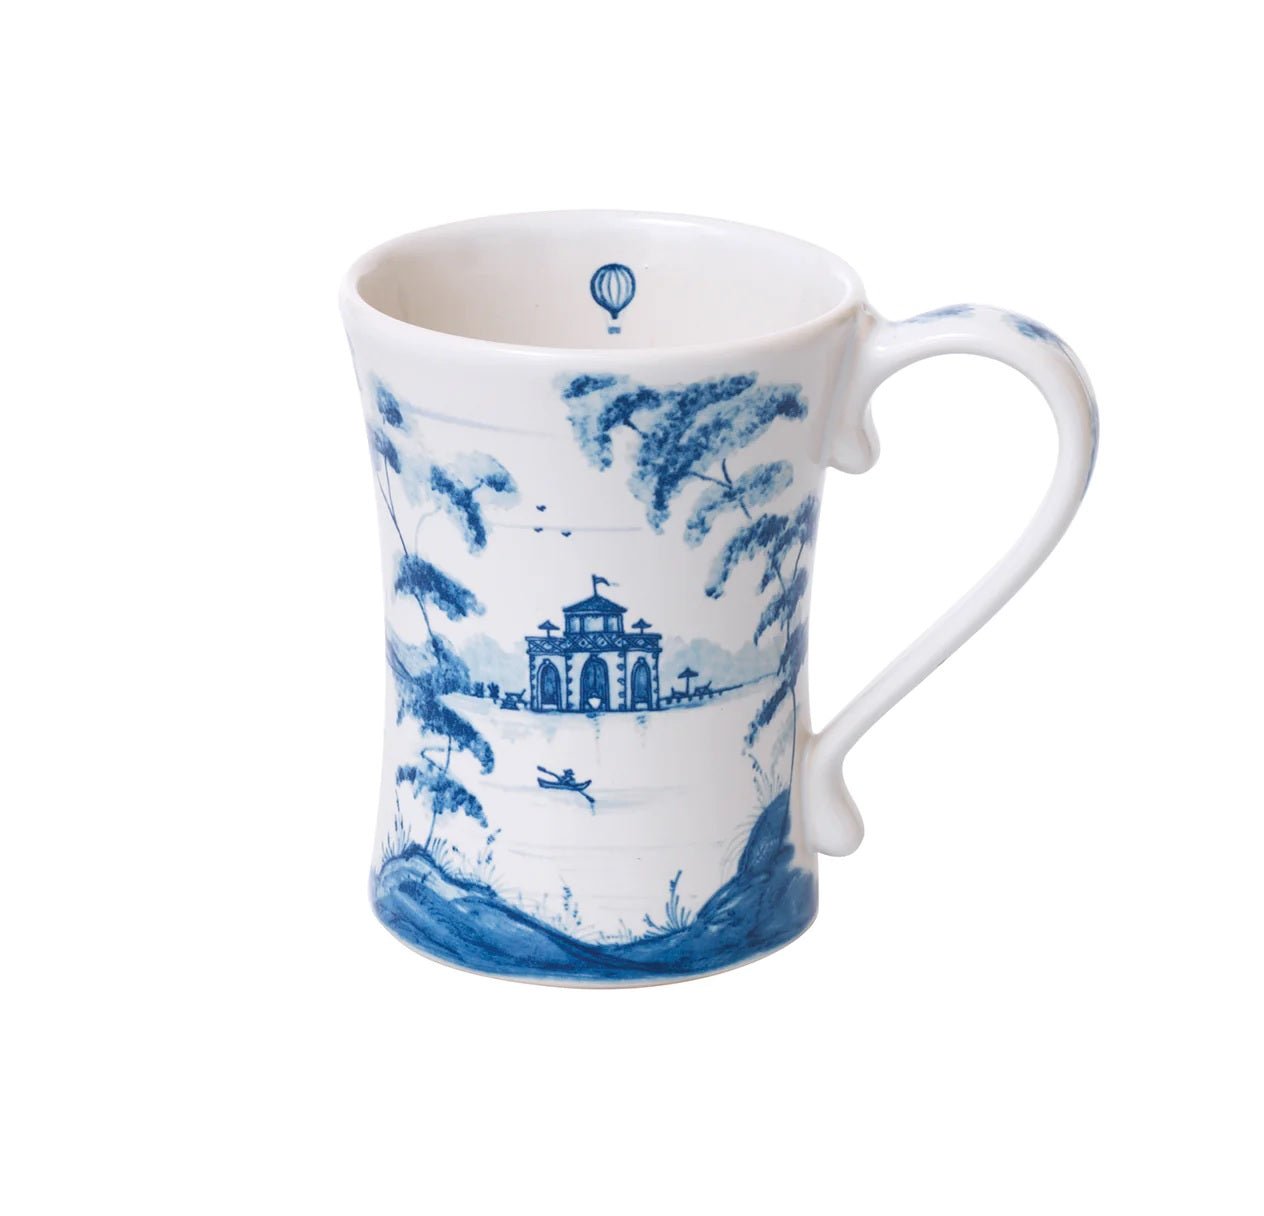 Country Estate Mug Sporting-Delft Blue - Gaines Jewelers